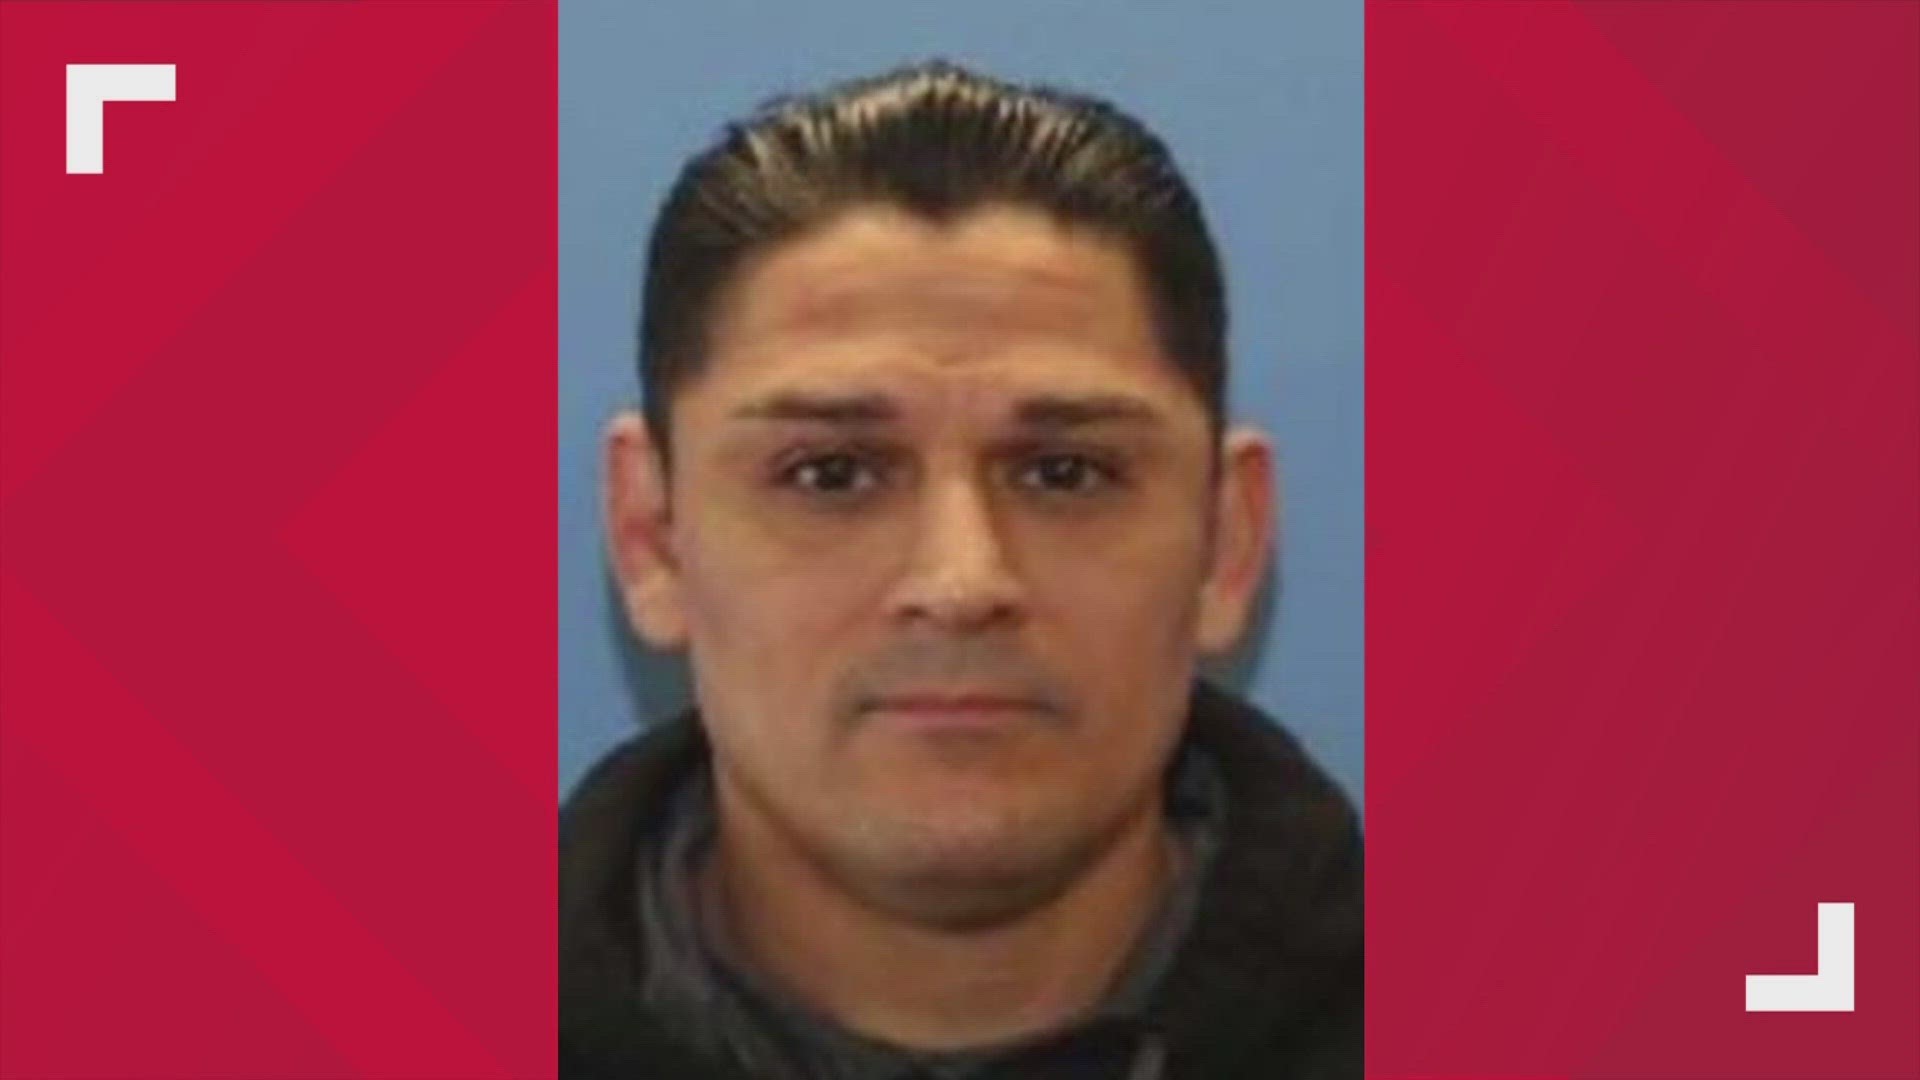 Elias Huizar is suspected of killing his ex-wife and girlfriend in Washington and abducting a 1-year-old, sparking a manhunt. The child is now in police custody.